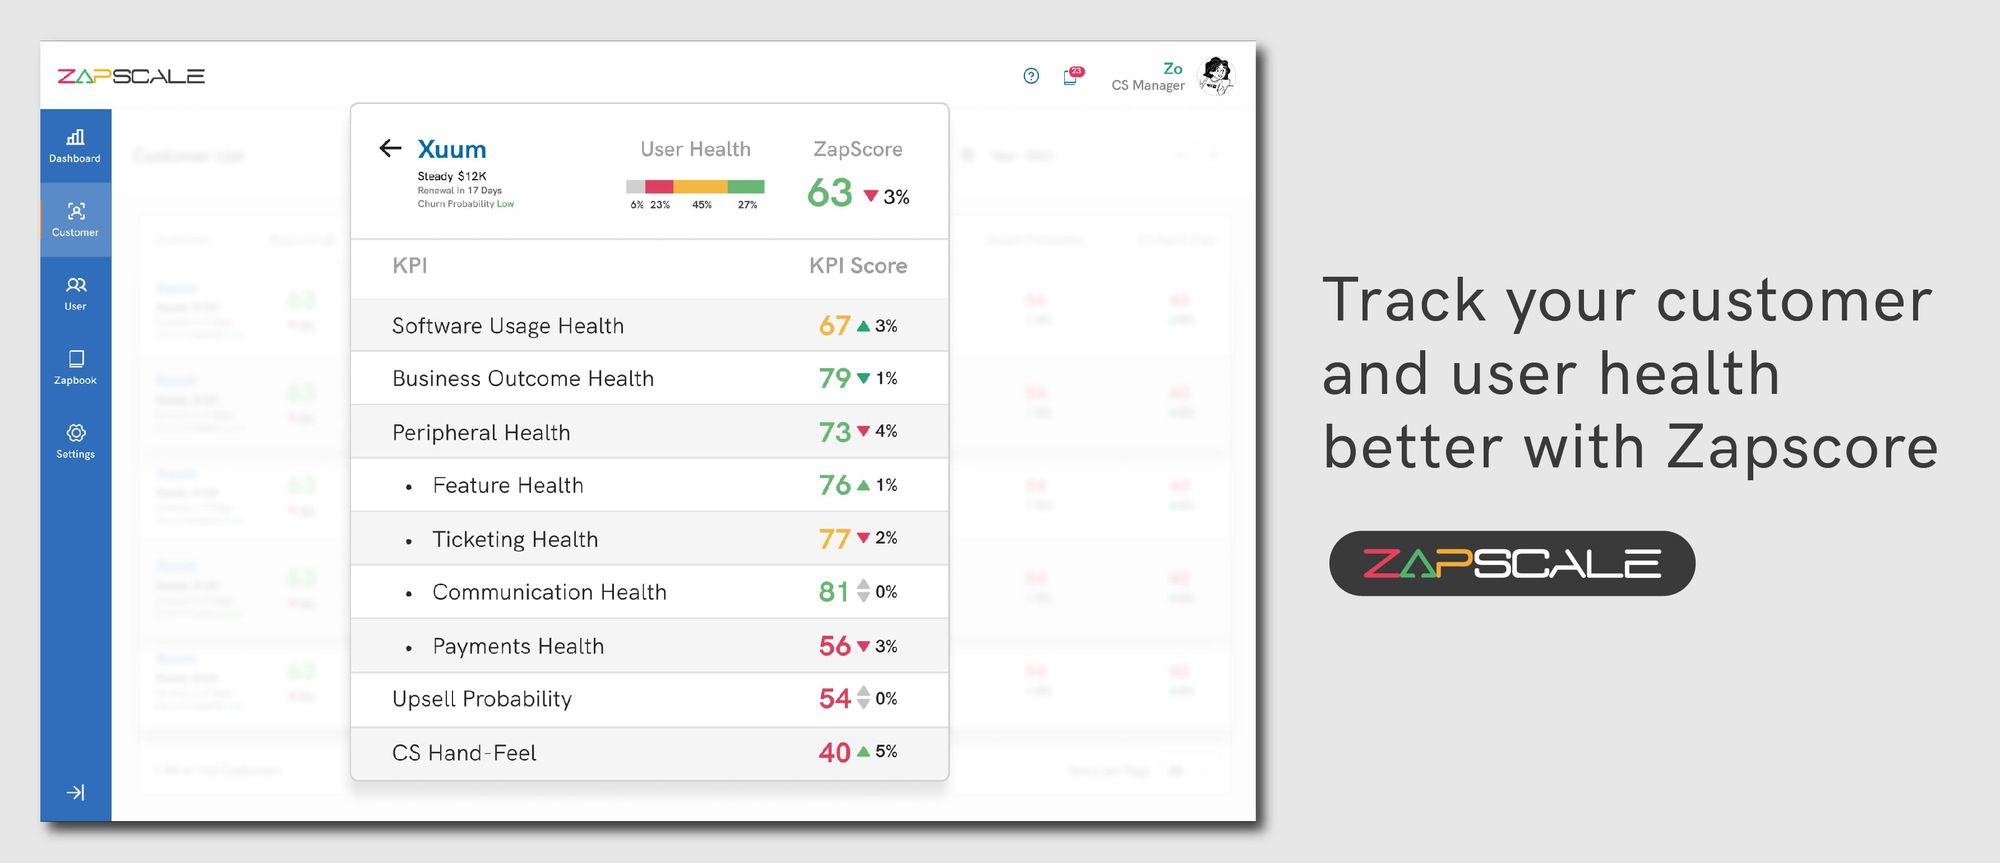 Infographic shows how ZapScale gives the most comprehensive customer health score